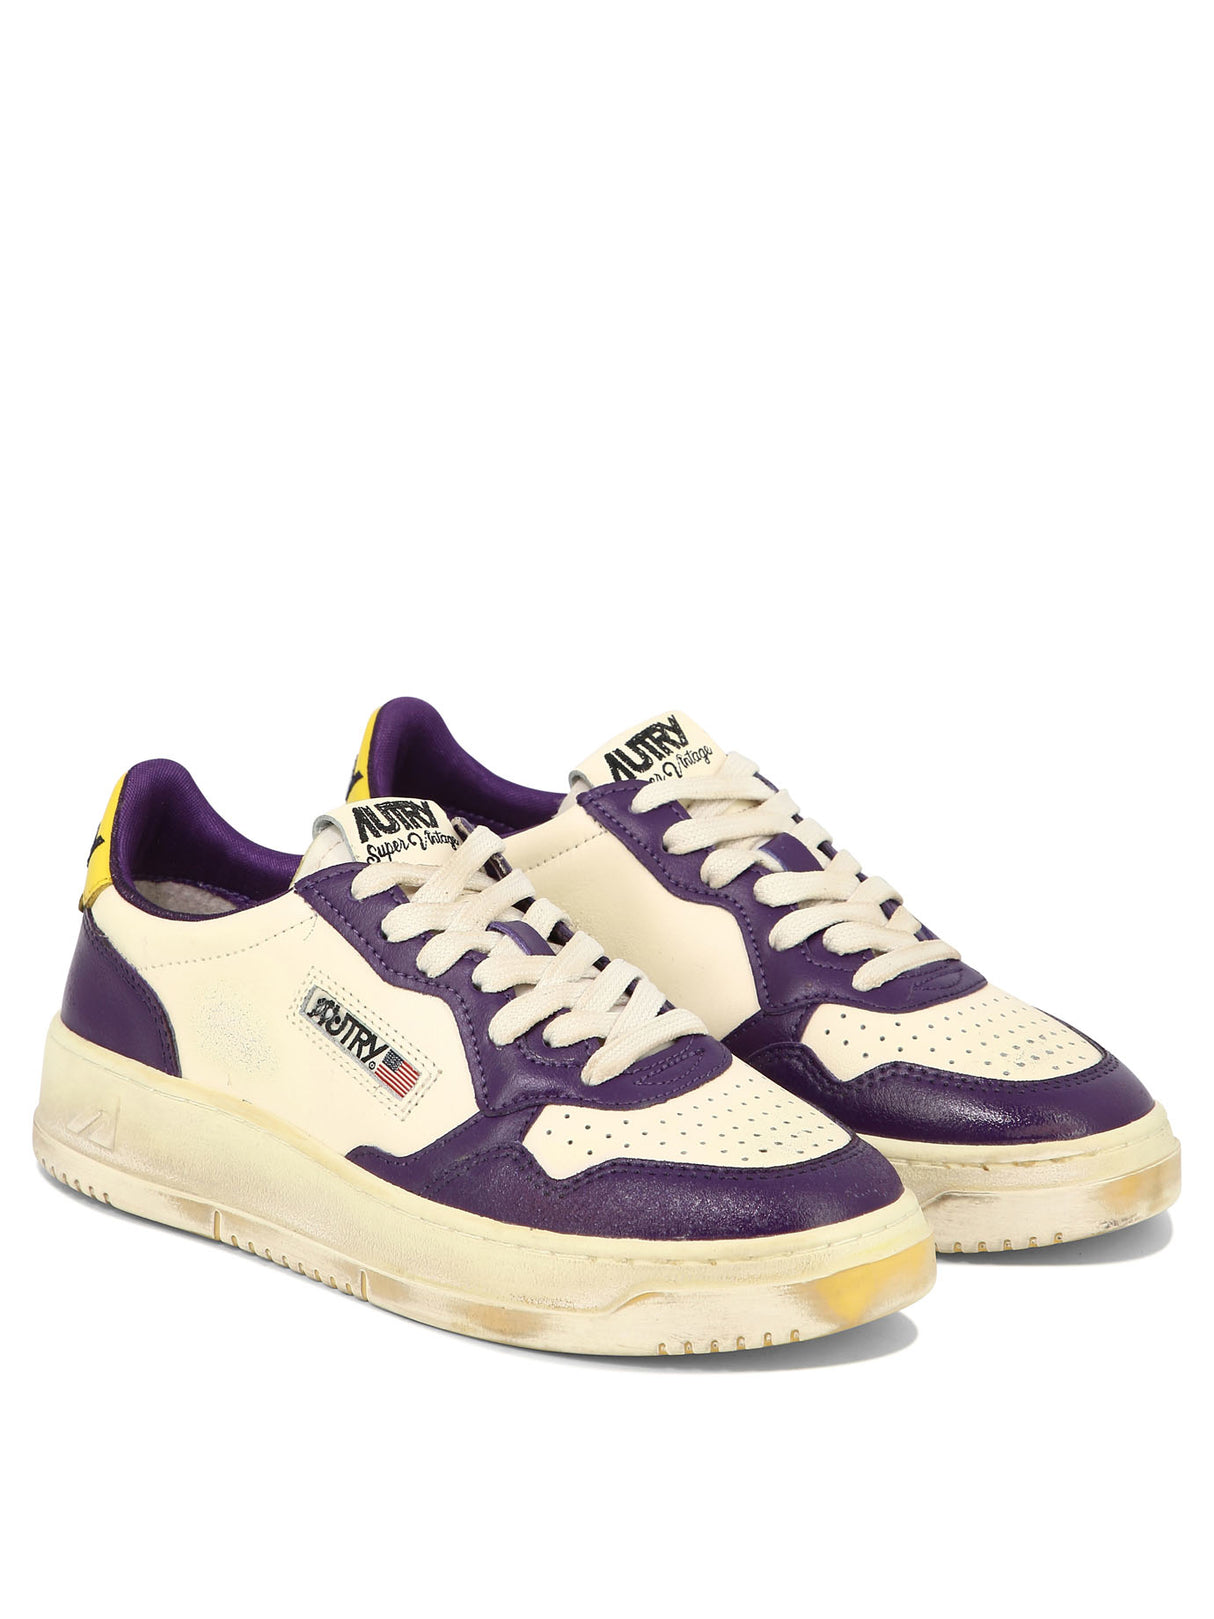 AUTRY Vintage-Inspired Purple Sneakers for Women